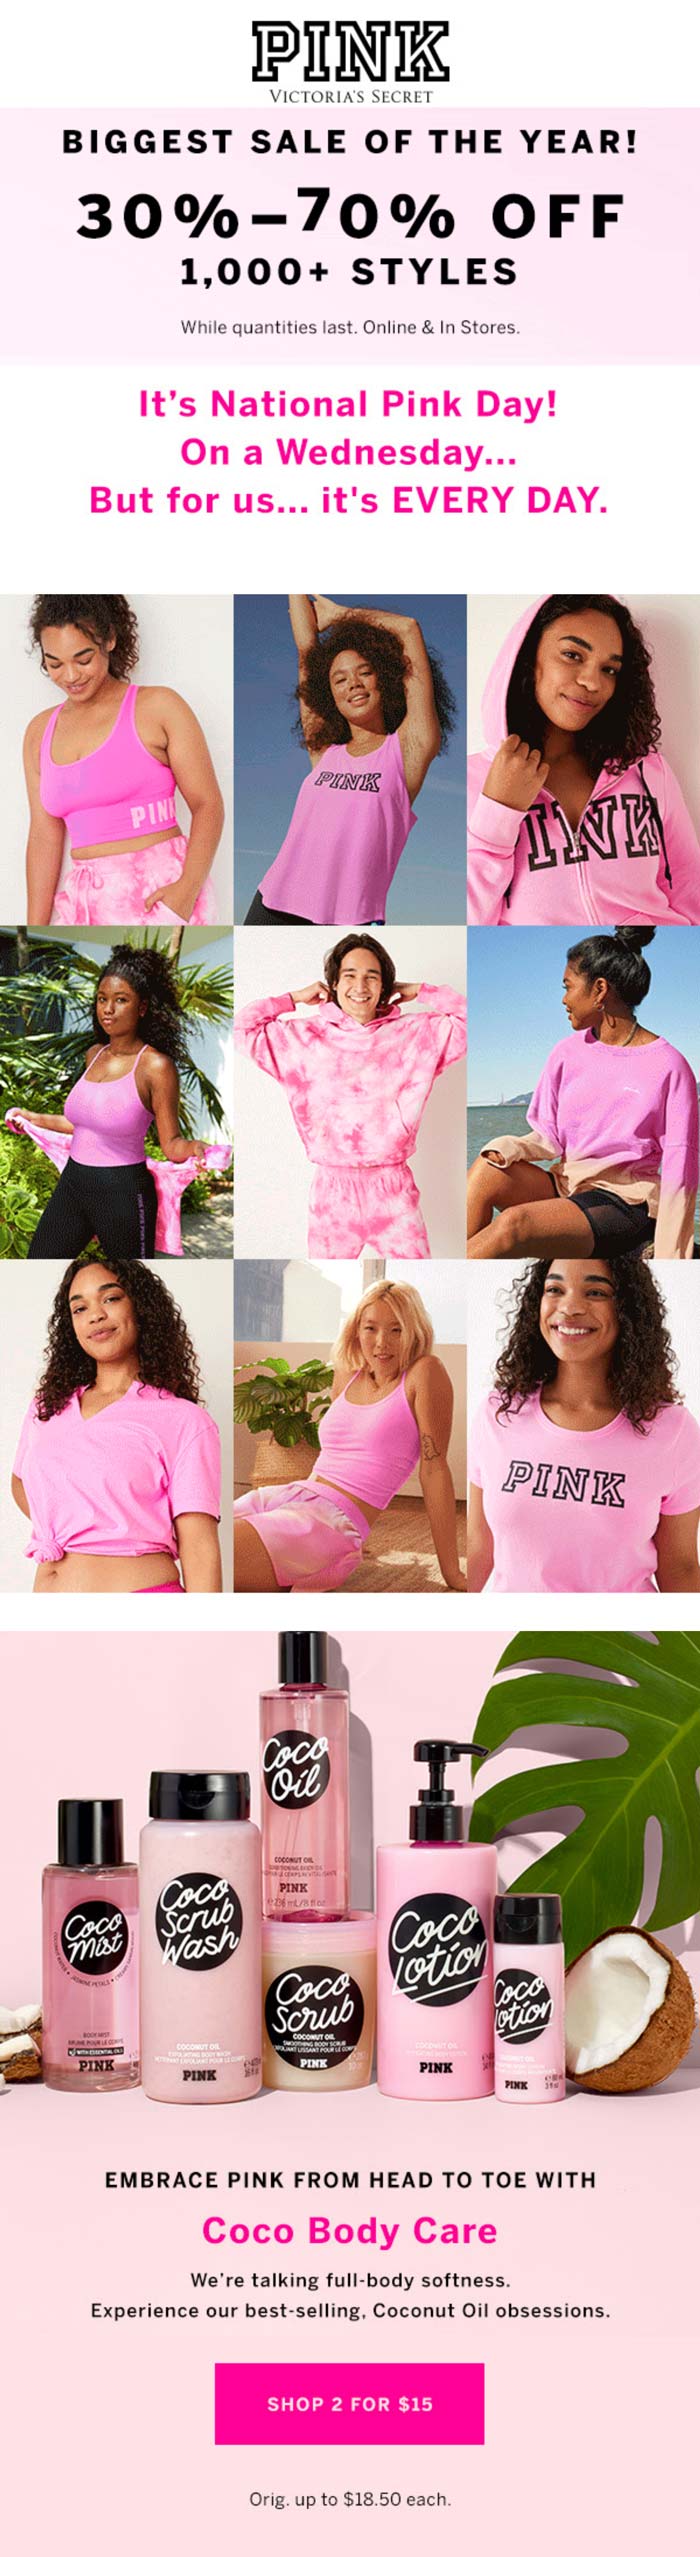 PINK stores Coupon  30-70% off at Victorias Secret PINK, ditto online #pink 